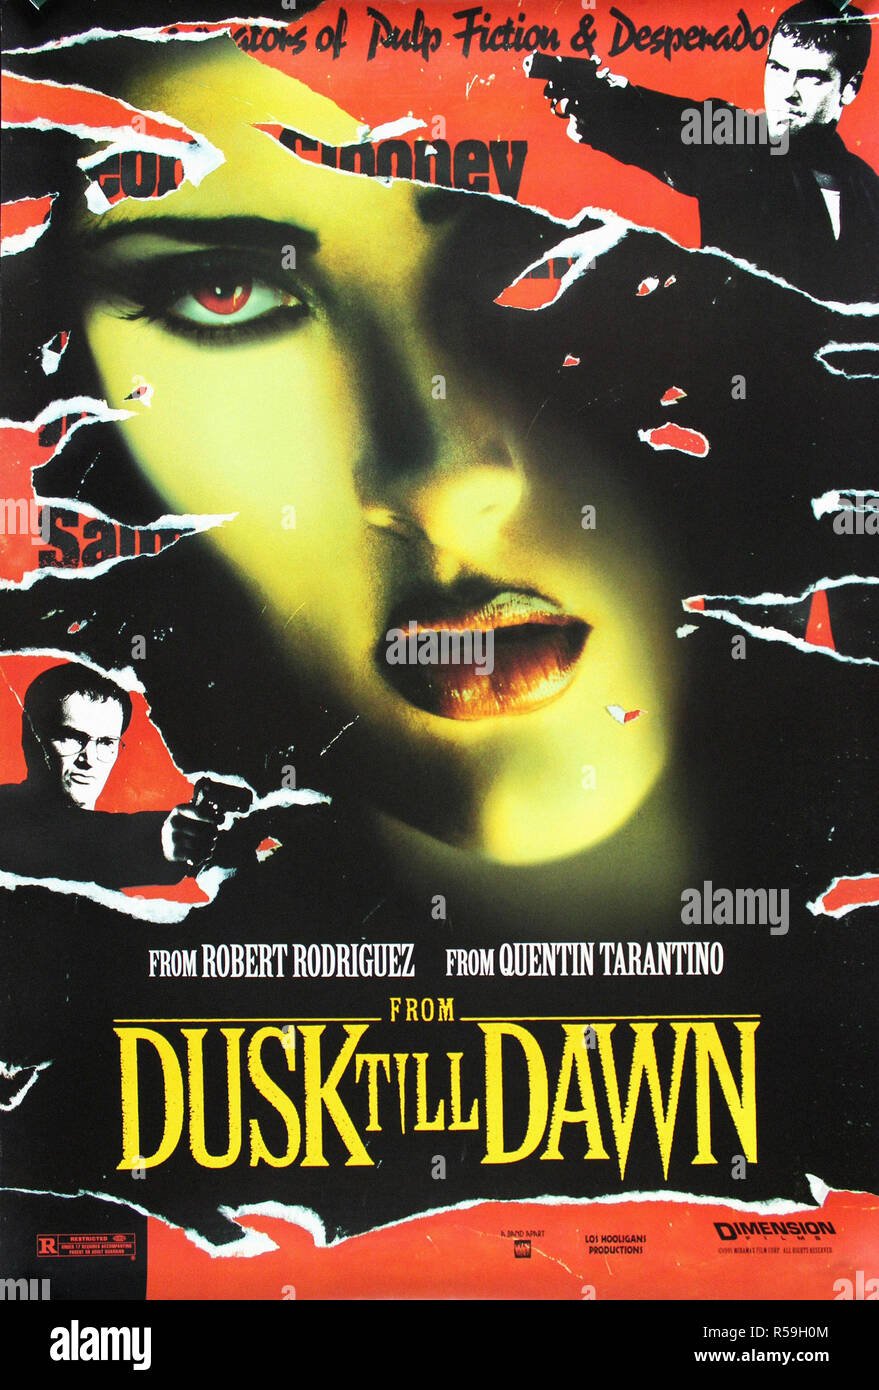 From Dusk Till Dawn - Original Movie Poster Banque D'Images